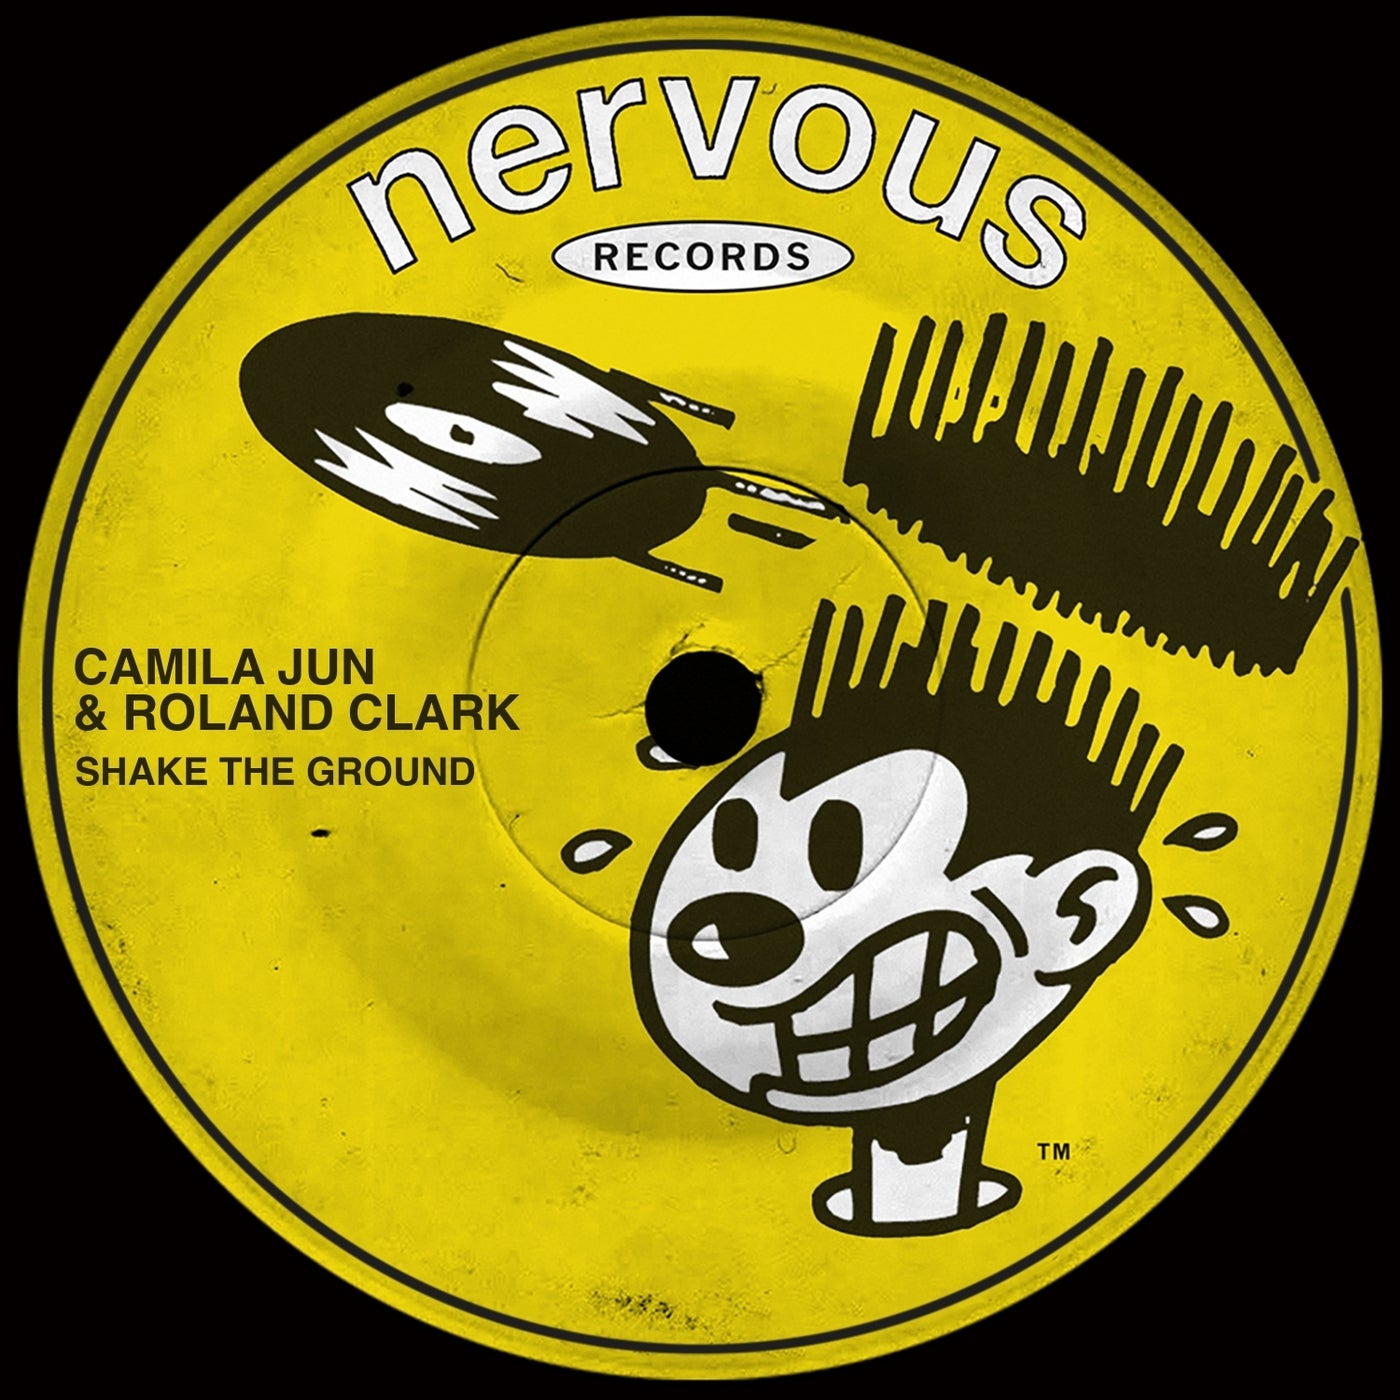 image cover: Roland Clark, Camila Jun - Shake The Ground on Nervous Records